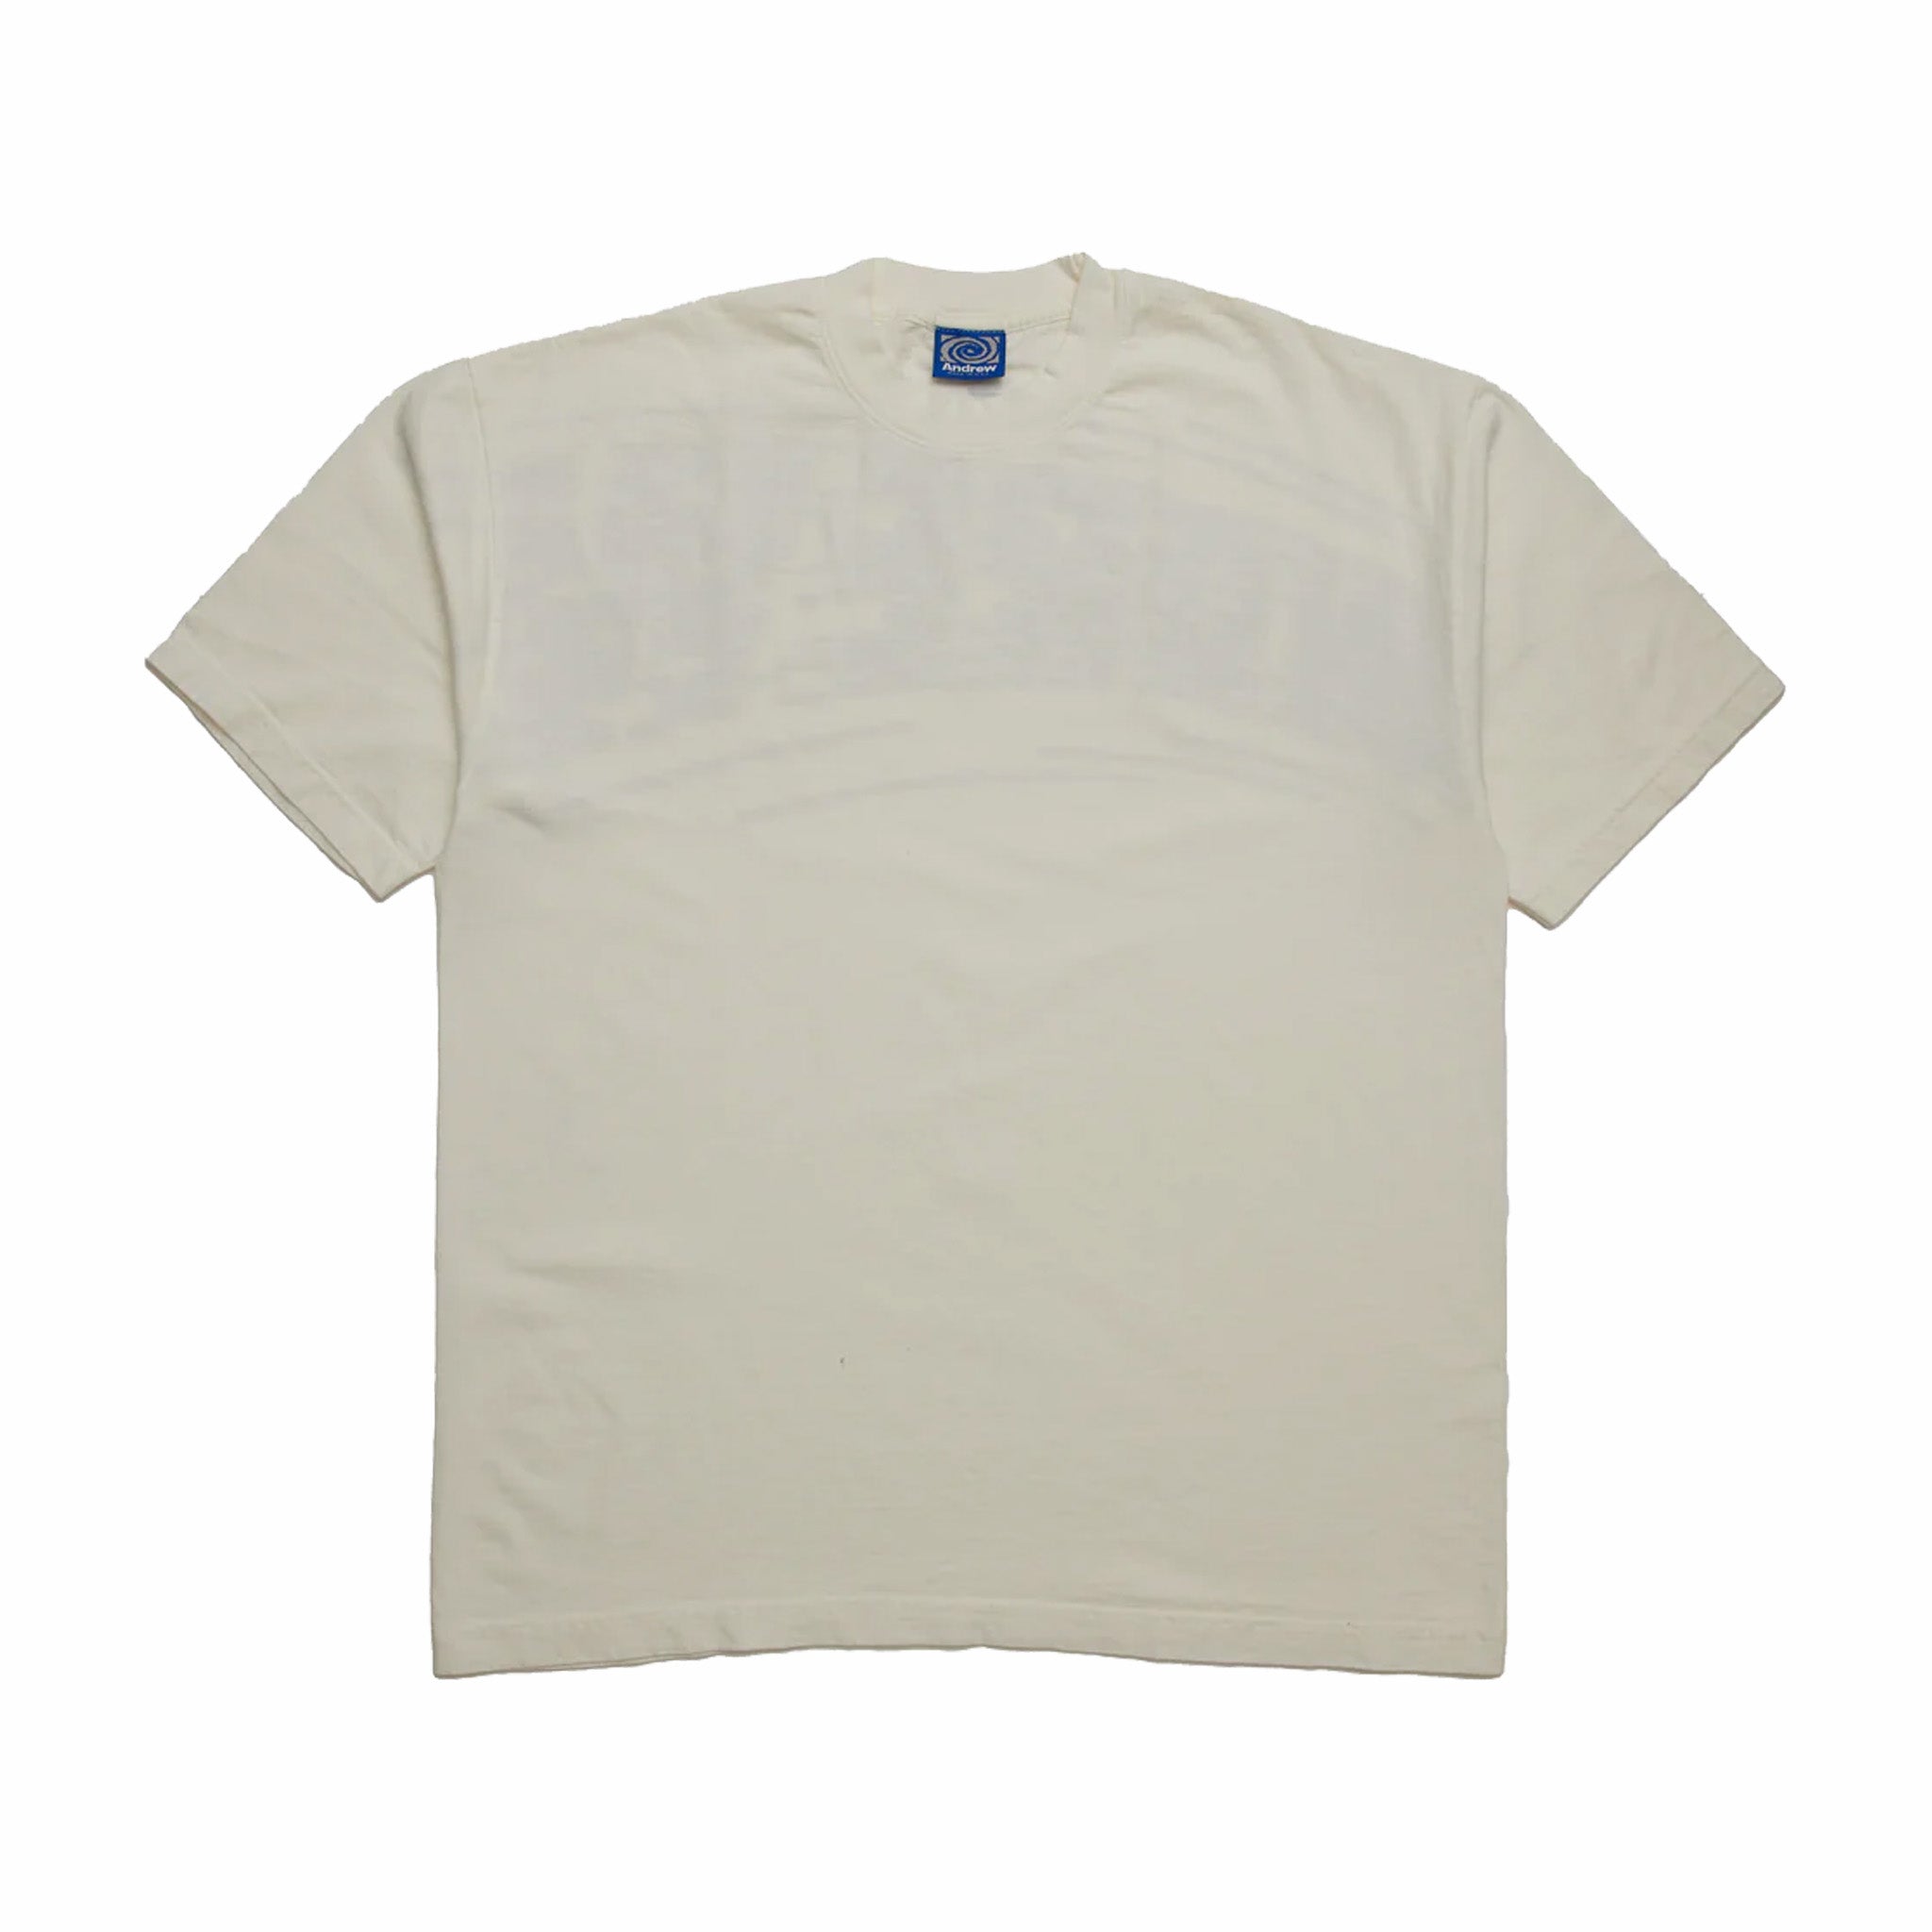 Andrew Speed T-Shirt (Off White) - August Shop